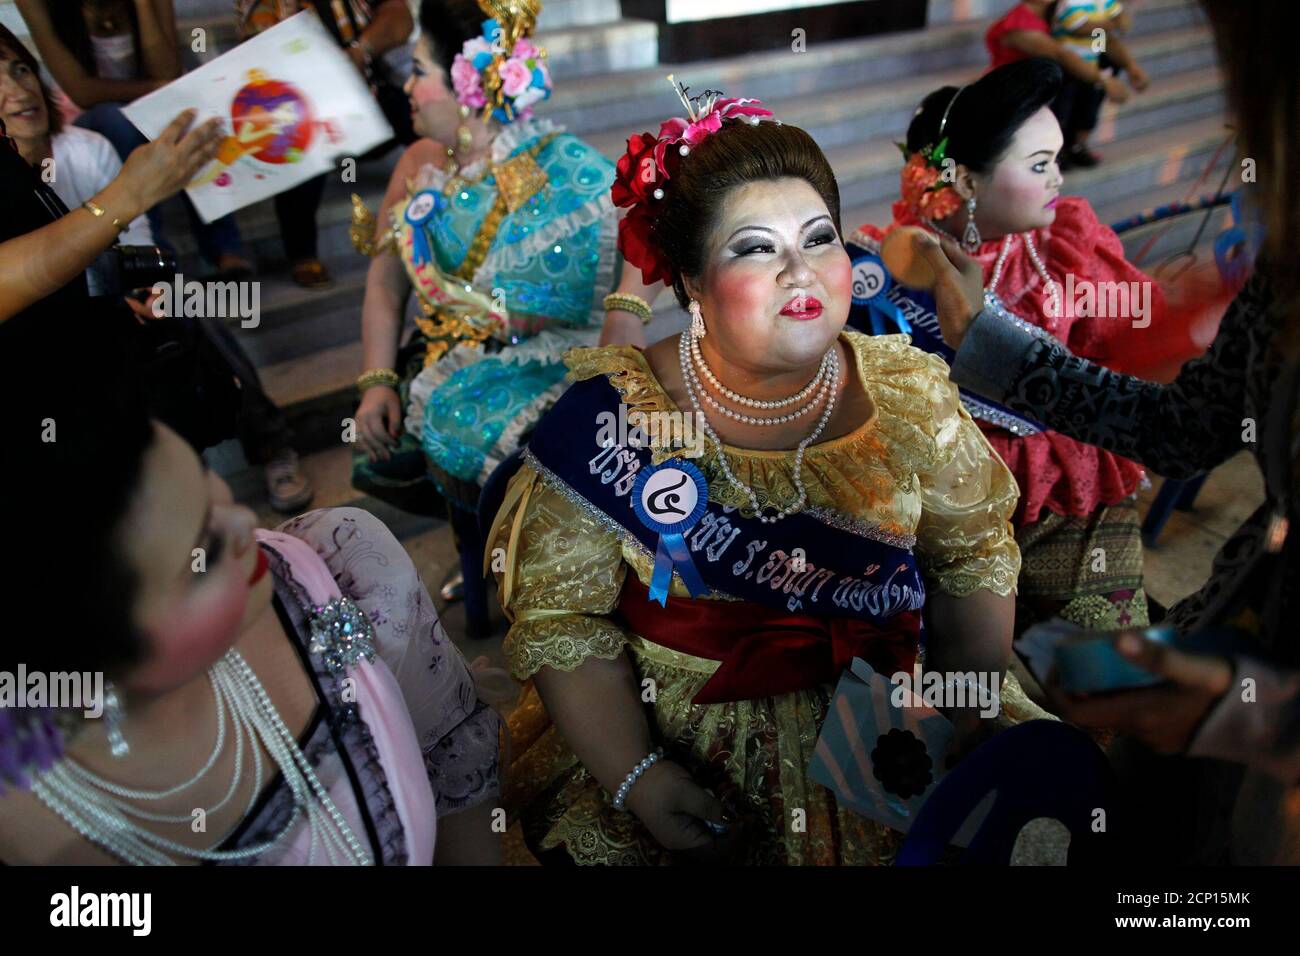 Participants in the Jumbo Queen beauty contest get ready to go onto the stage in Ayutthaya late December 19, 2009. More than 30 Thai ladies took part in the Jumbo Queen beauty contest for women over 80 kg in the world heritage site of Ayutthaya.  REUTERS/Damir Sagolj  (THAILAND - Tags: SOCIETY IMAGES OF THE DAY) Stock Photo